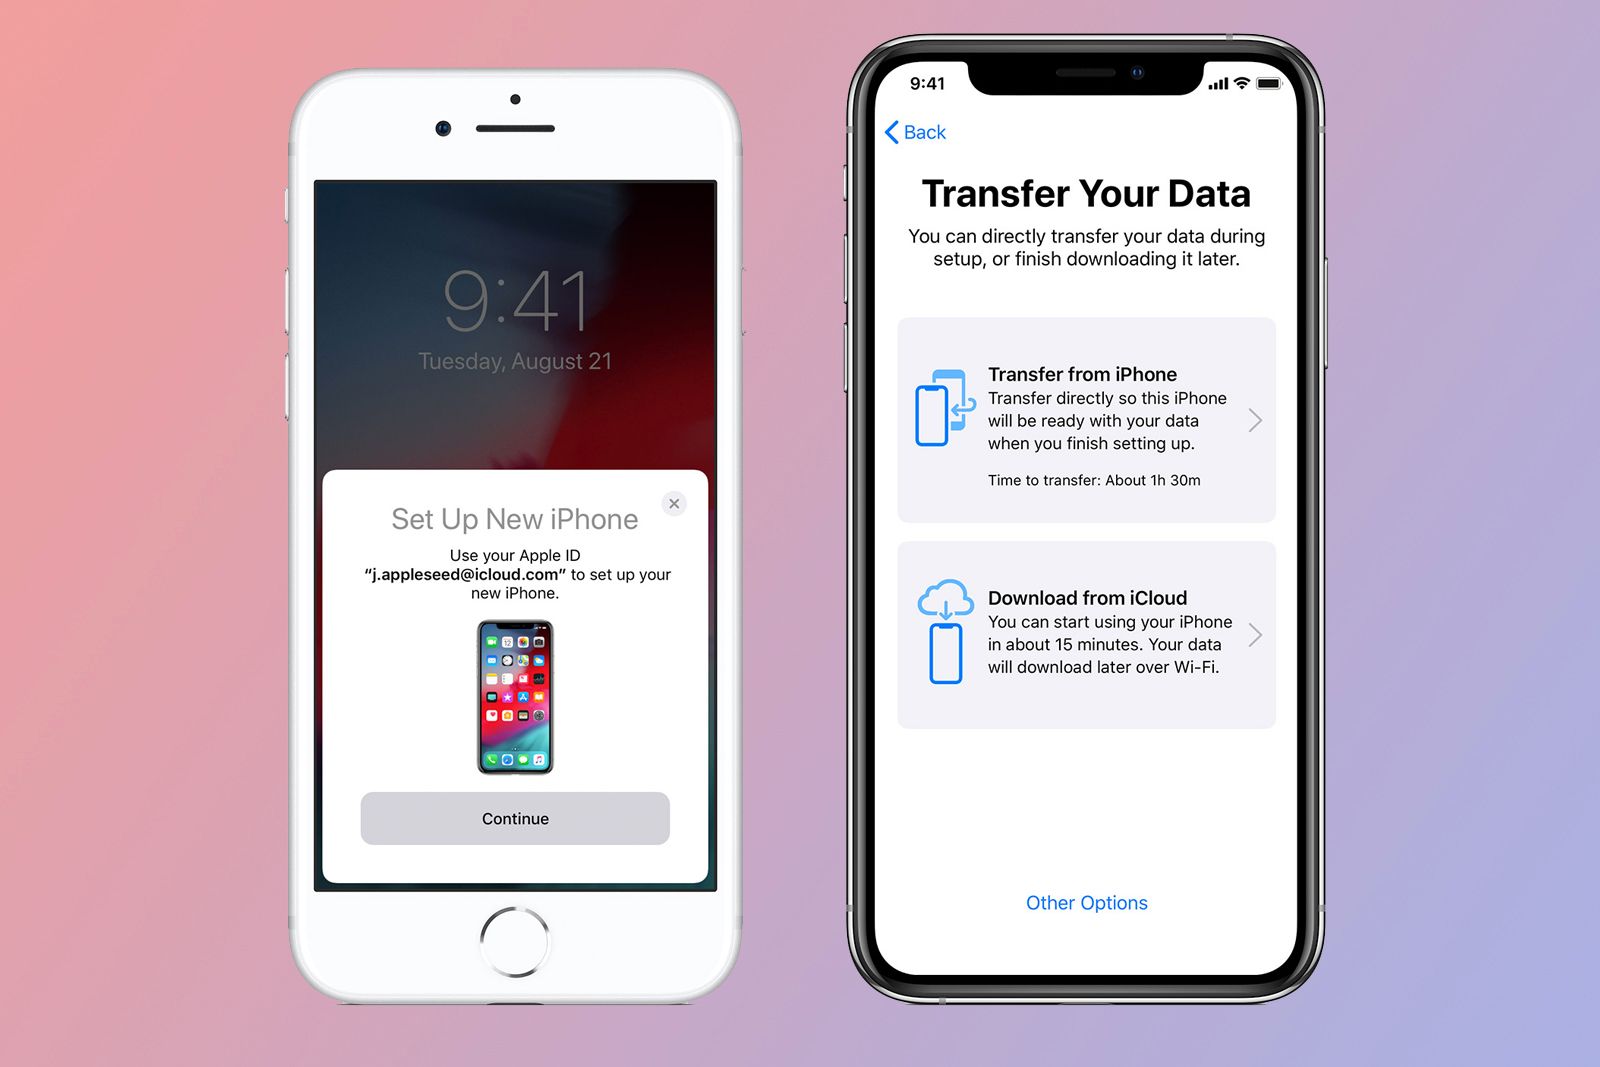 Can I use my old iPhone while transferring?